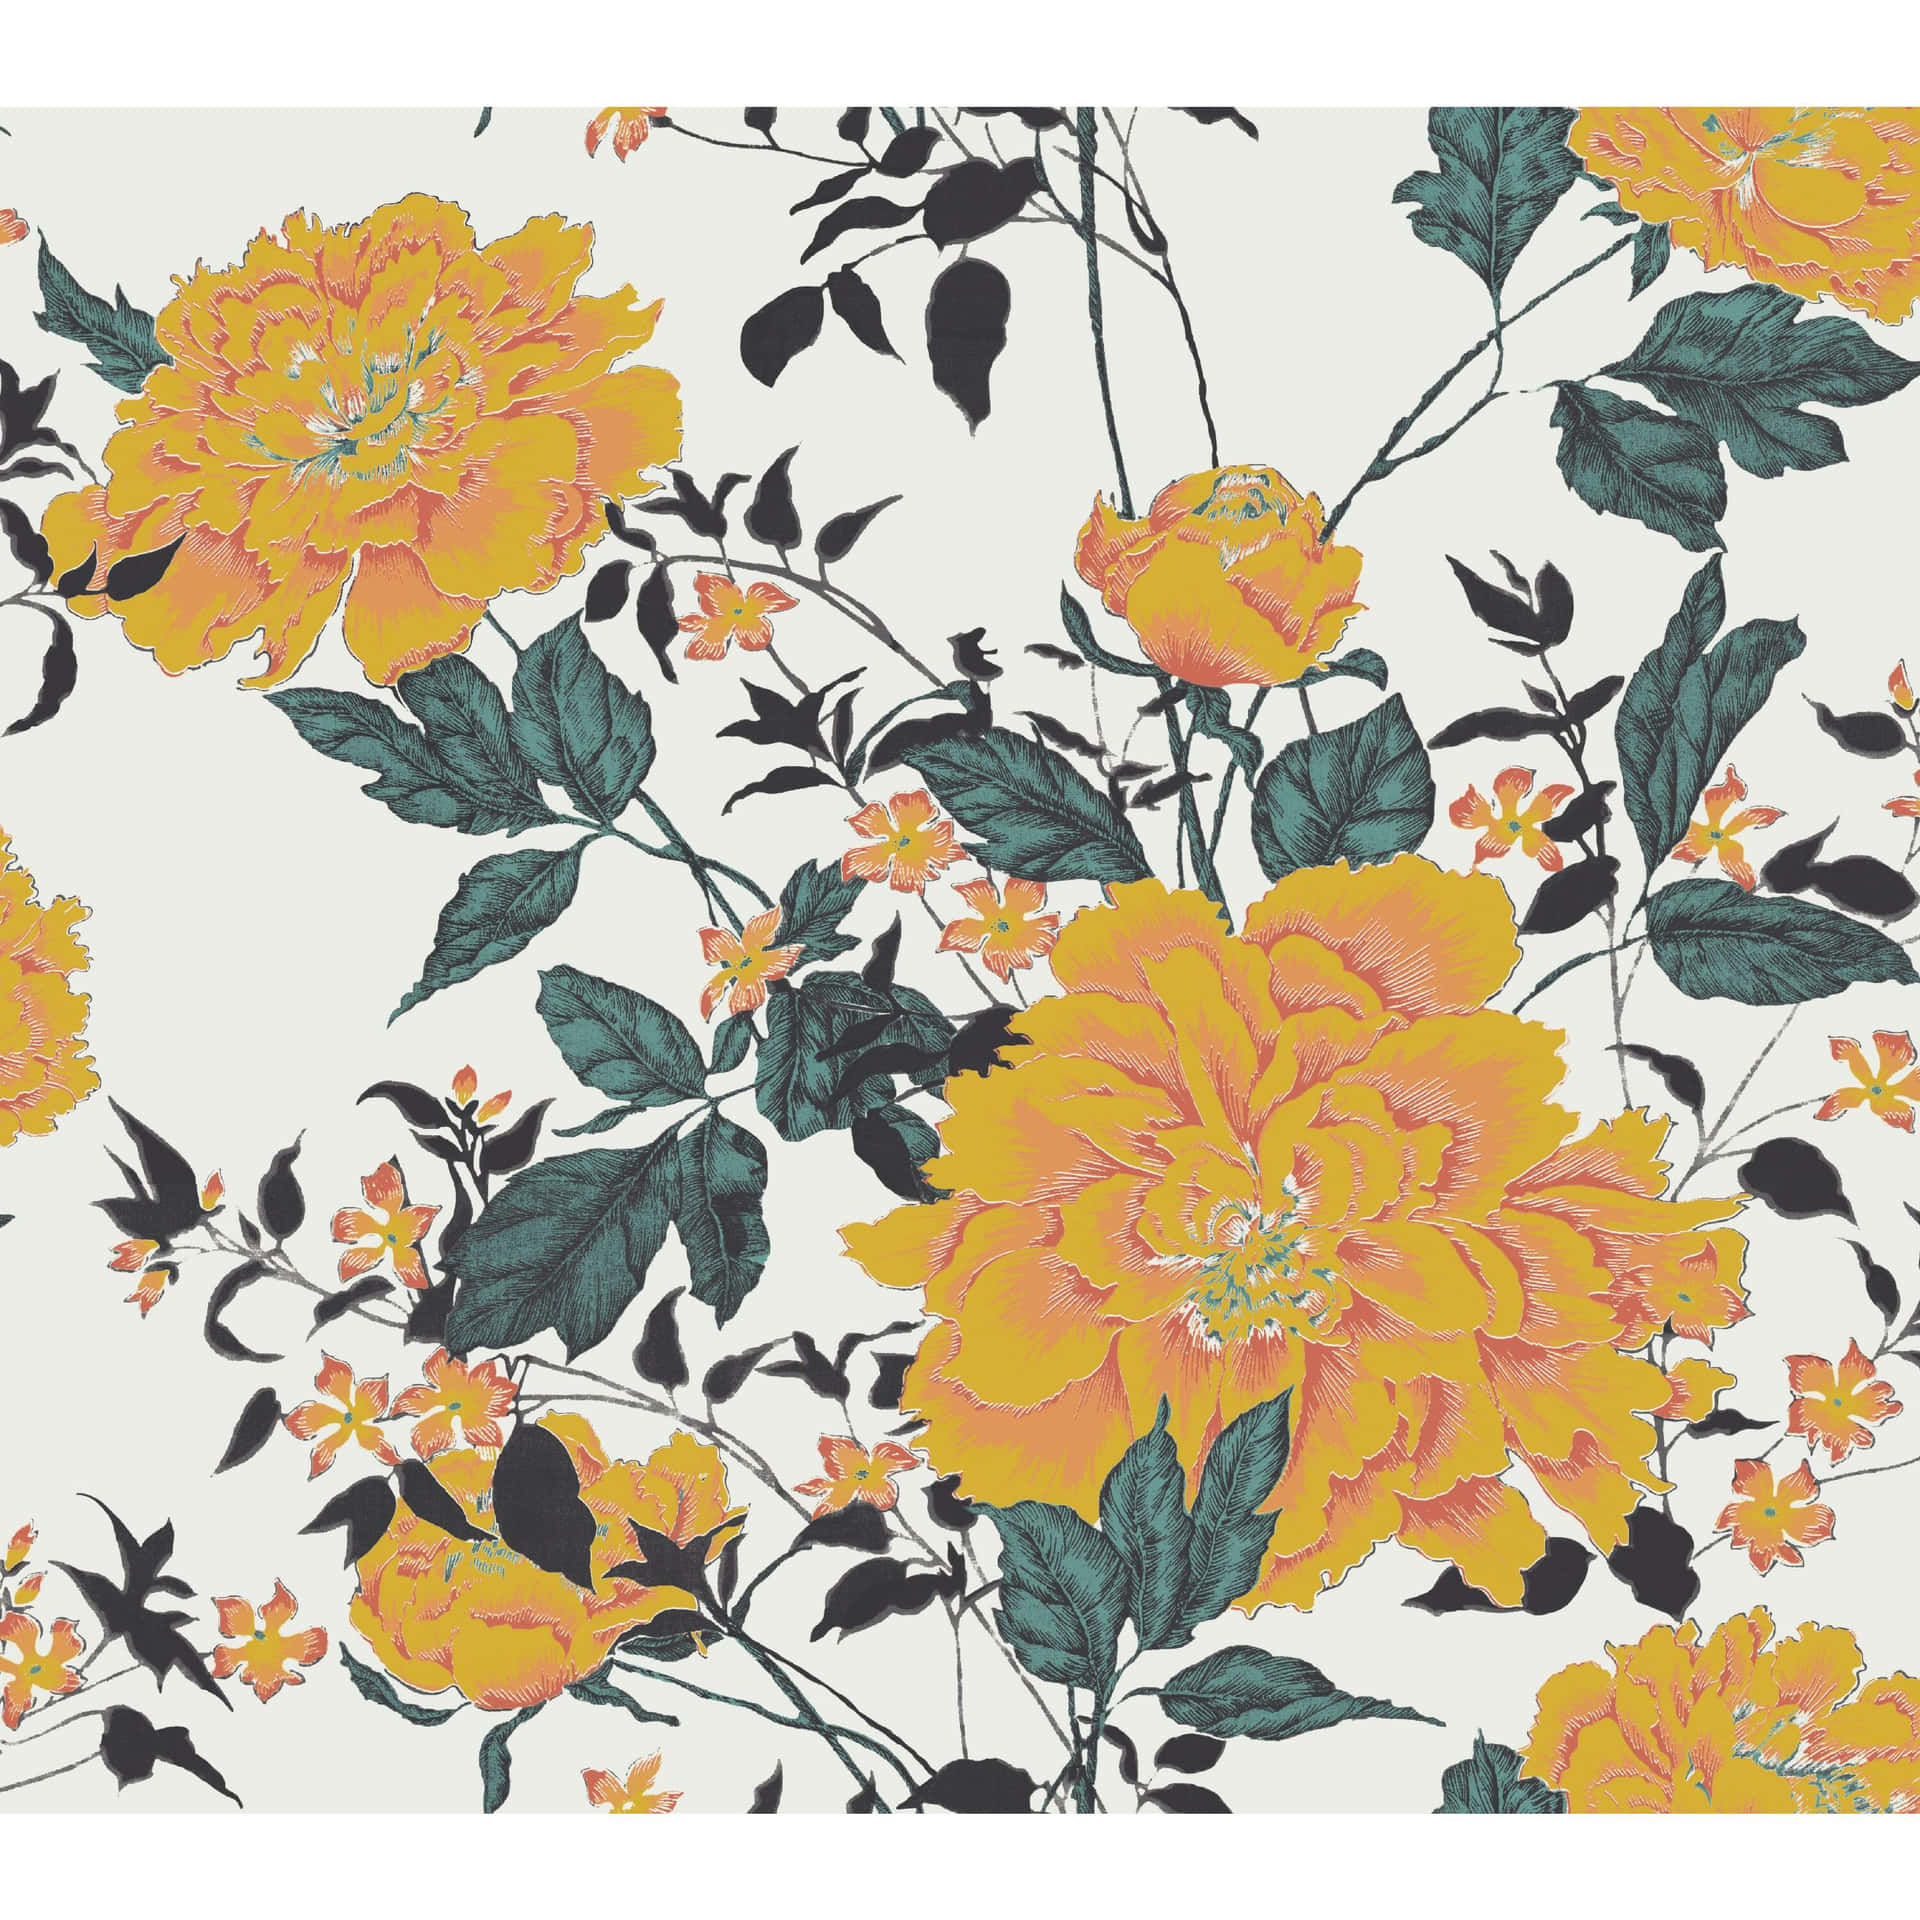 Add a touch of vintage with a beautiful floral background